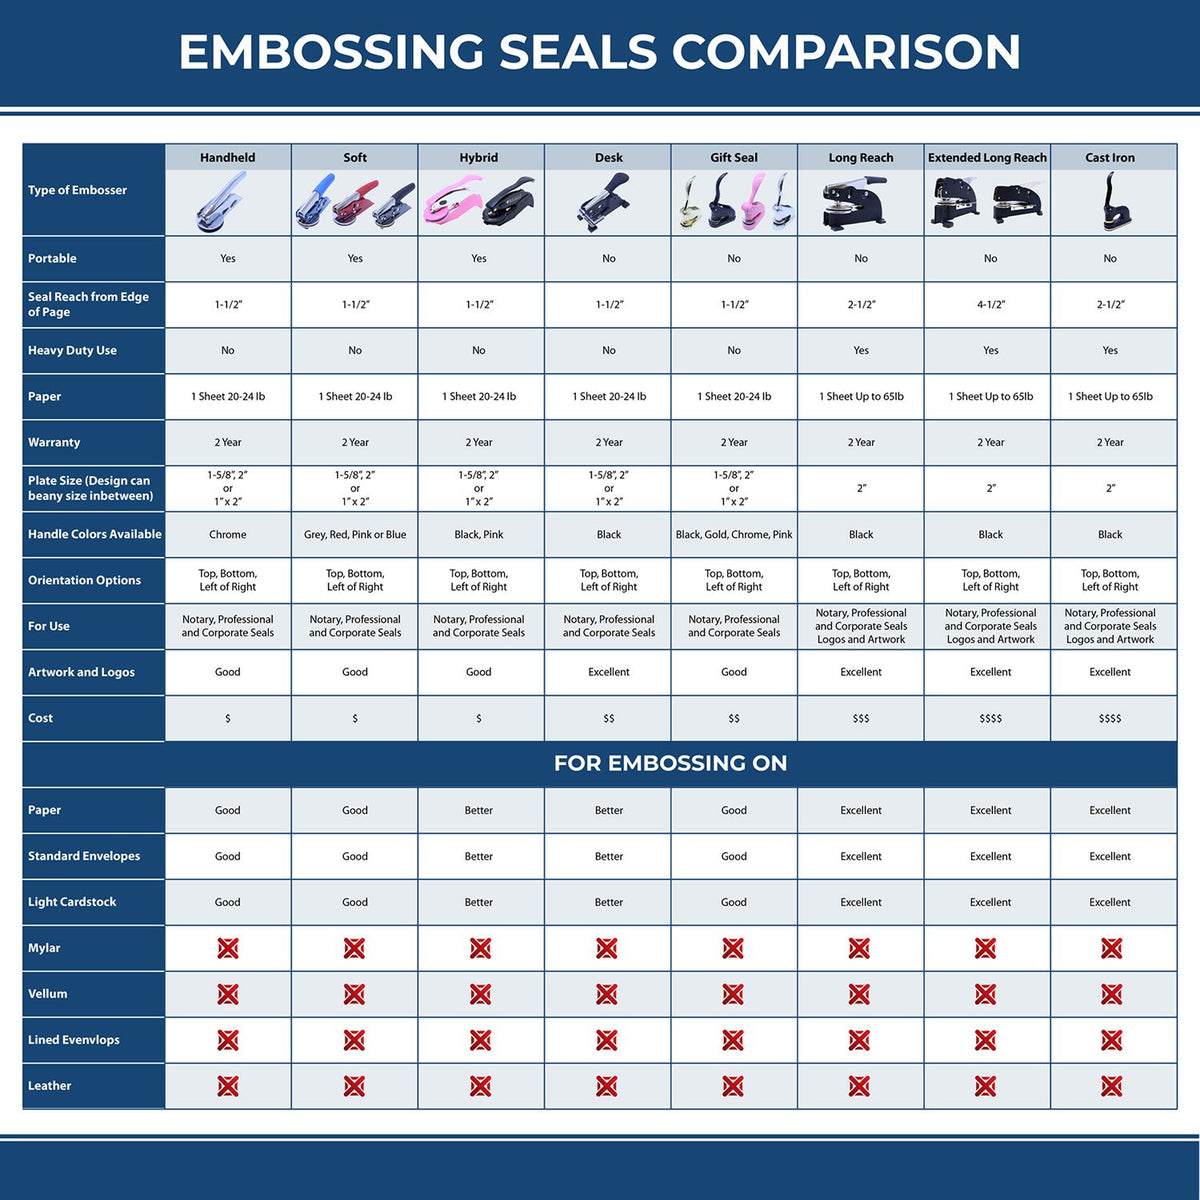 A comparison chart for the different types of mount models available for the State of North Dakota Extended Long Reach Geologist Seal